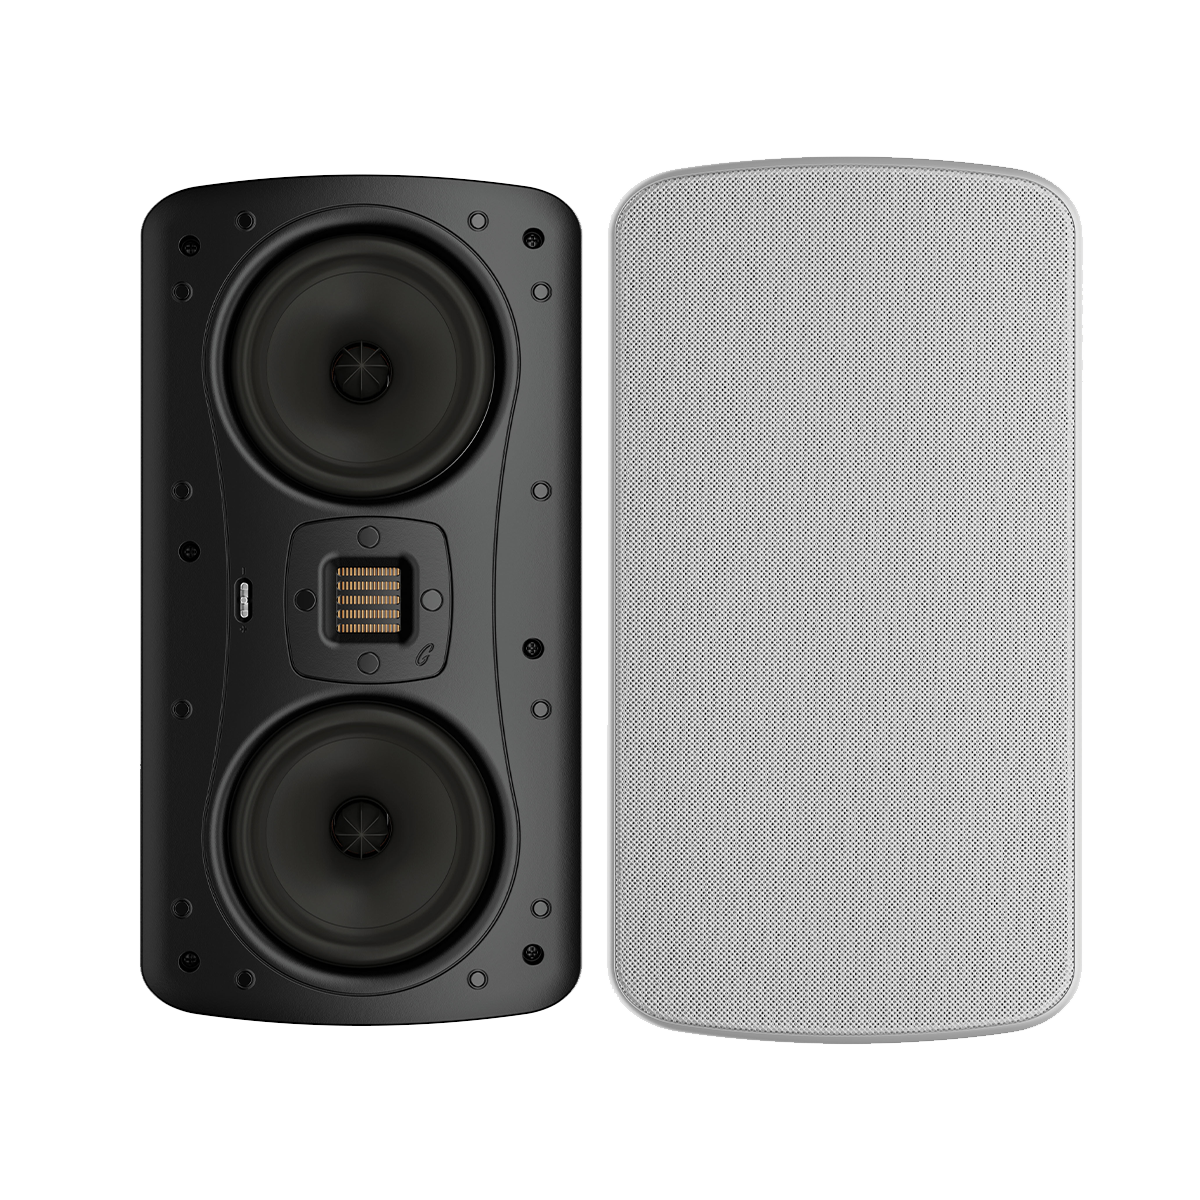 GoldenEar Invisa Junior Point Source (JPS) High-Performance In-Wall/In-Ceiling Loudspeaker with Rotatable AMT Tweeter and Compact Dimensions for Front Left, Right, or Center-Channel Applications for Home Theater Enthusiasts, Movie Lovers, Audiophiles